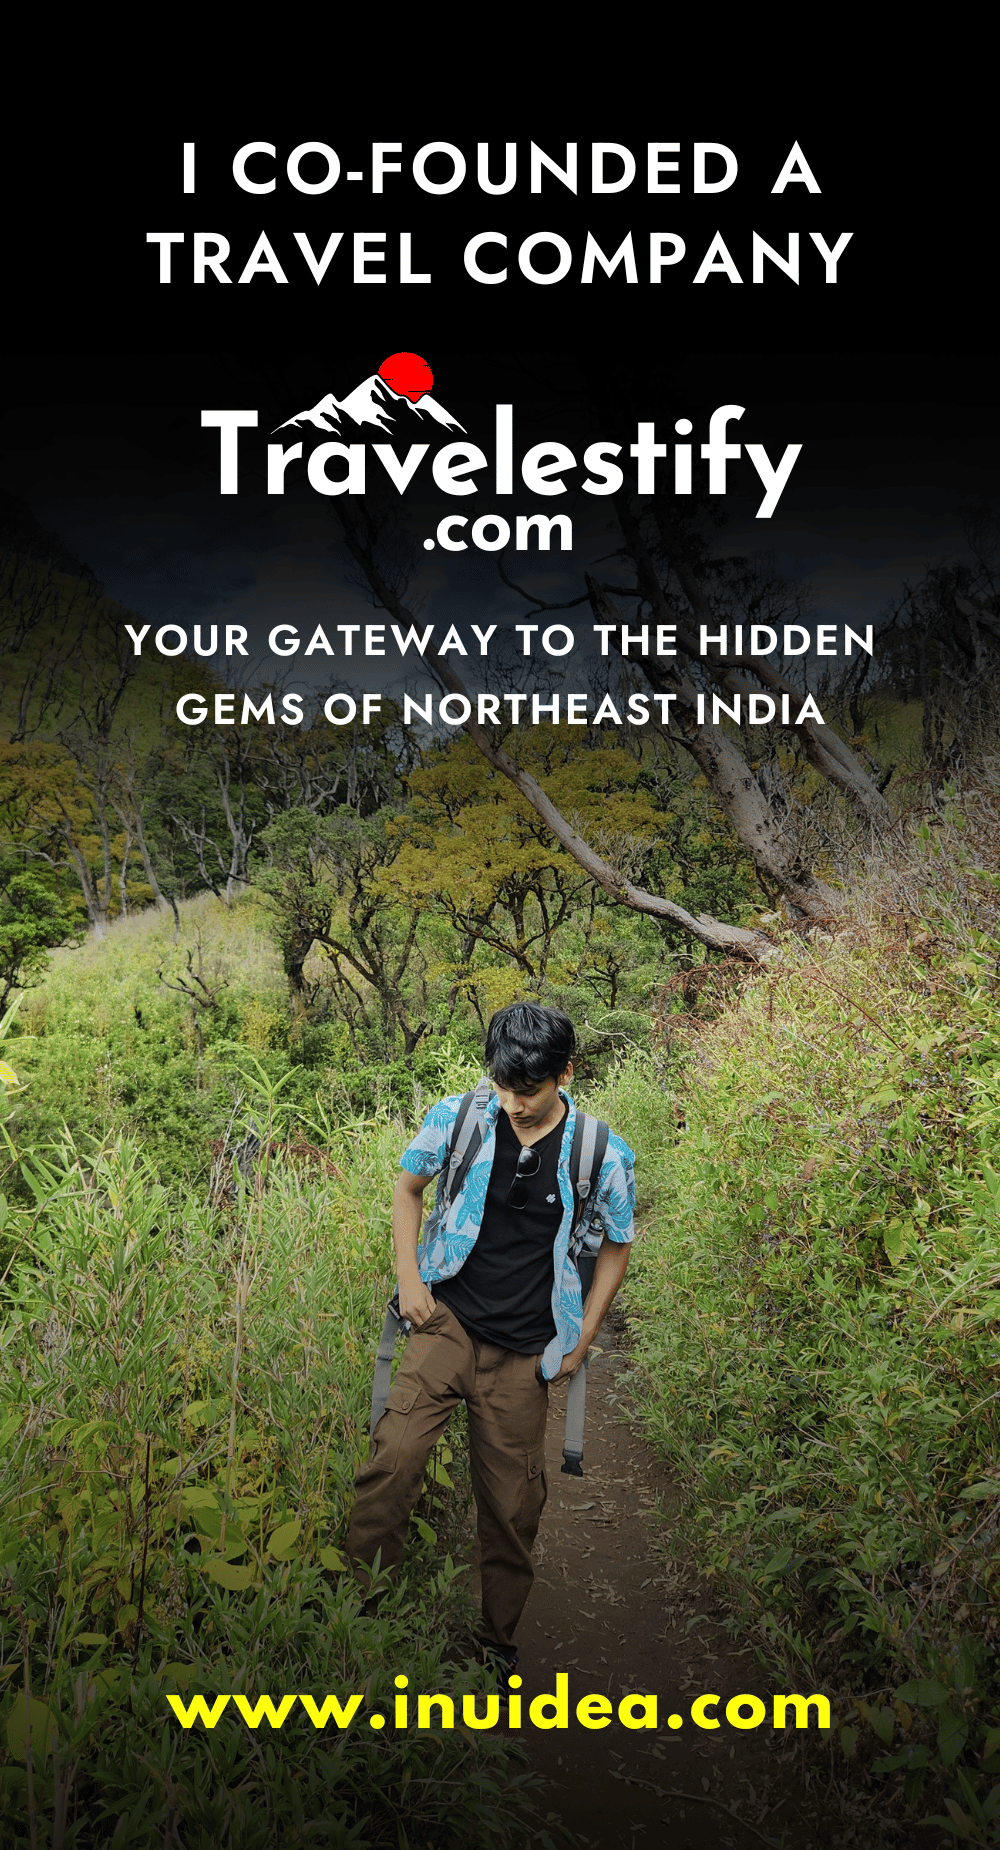 I Co-Founded a Travel Company - Travelestify.com: Your Gateway to the Hidden Gems of Northeast India- Inu Etc